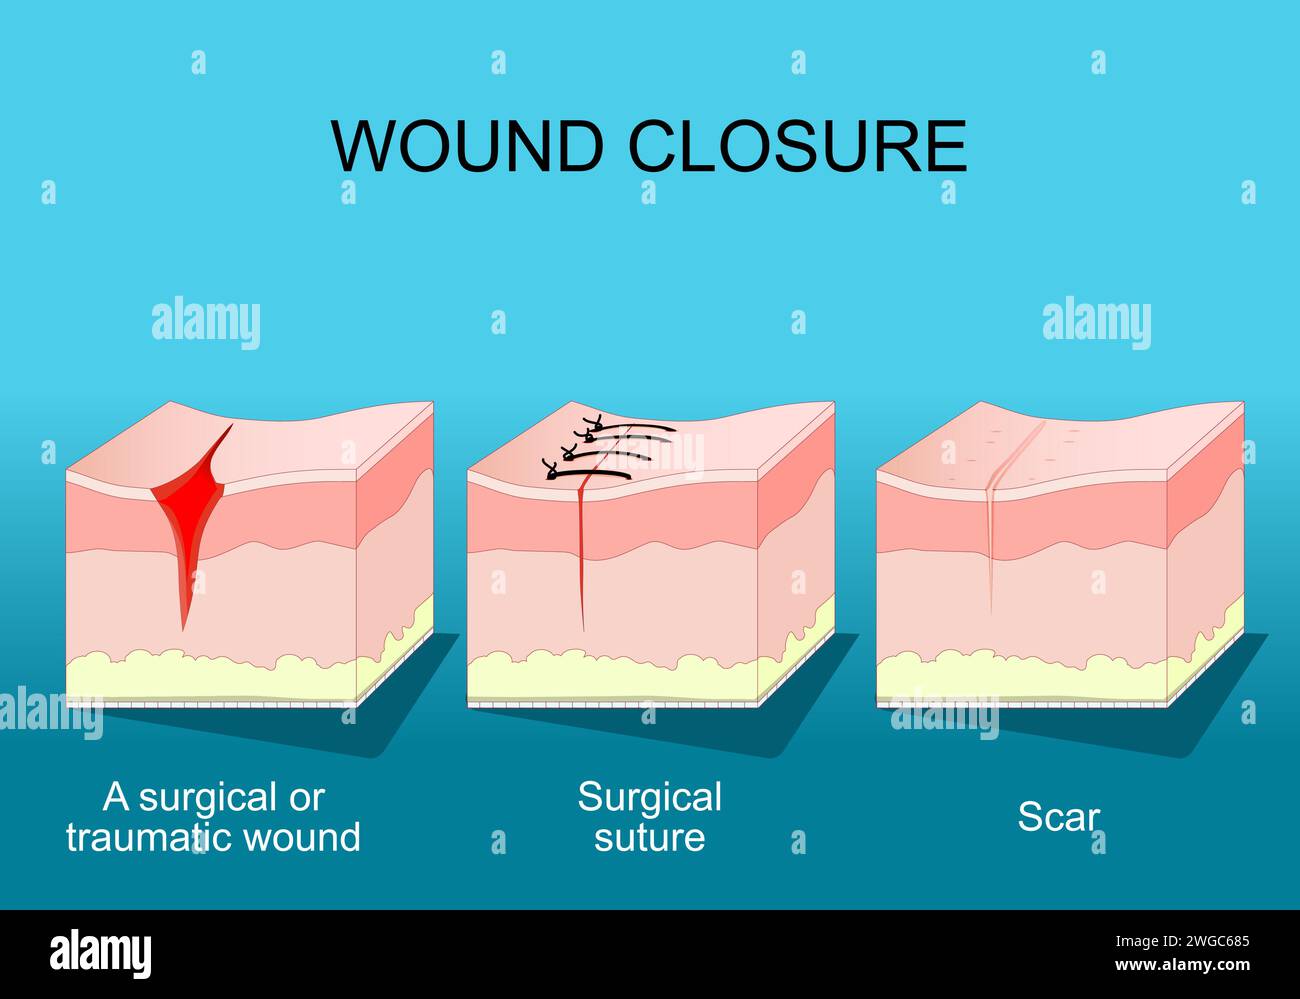 Wound healing. Skin before and after Wound Closure. From surgical or traumatic wound to suture and scar. A fibrous tissue replaces normal skin after a Stock Vector